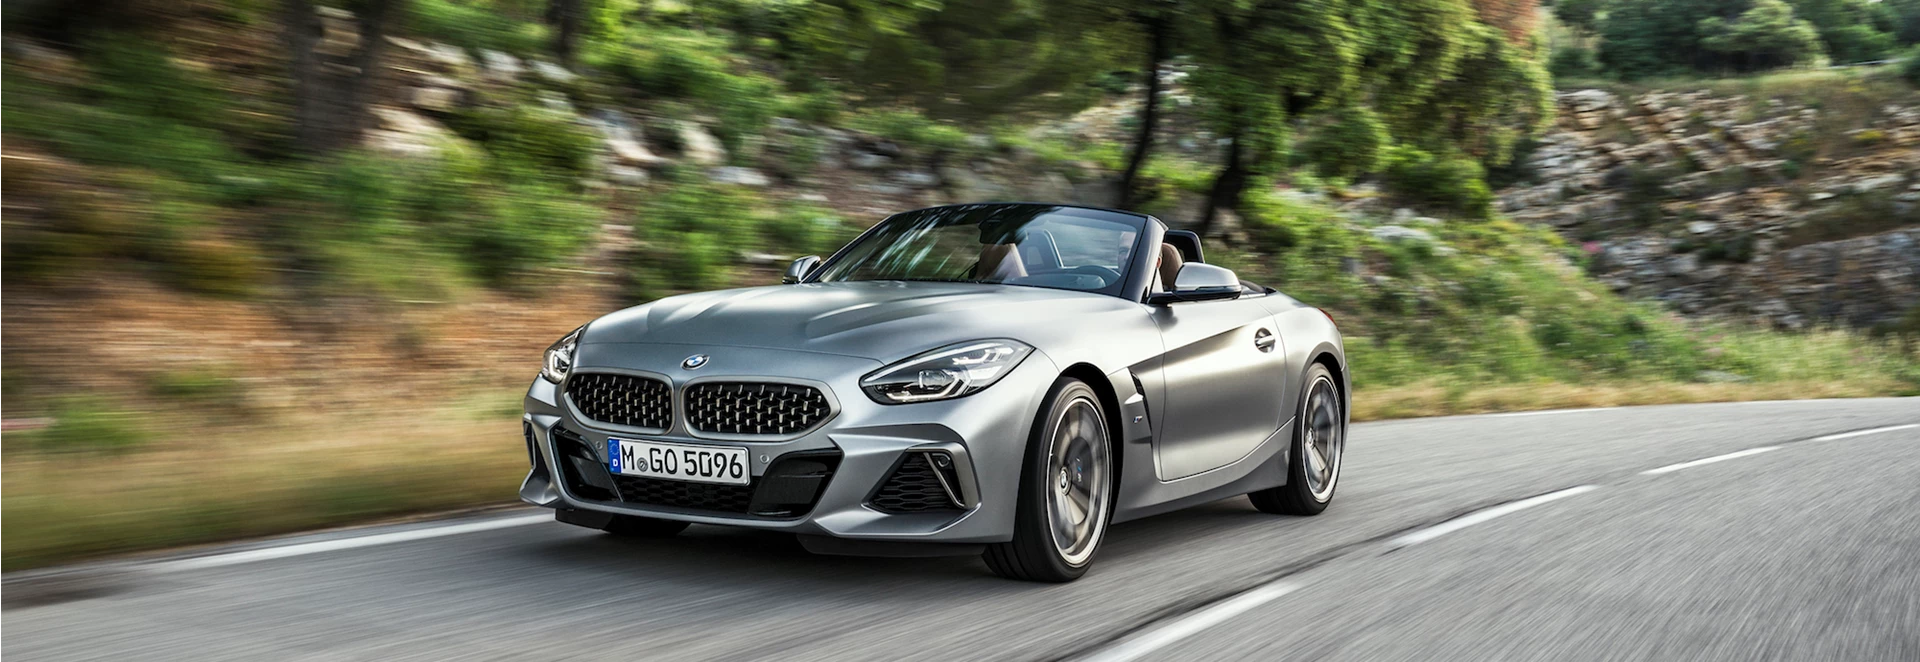 BMW releases specifications for new Z4